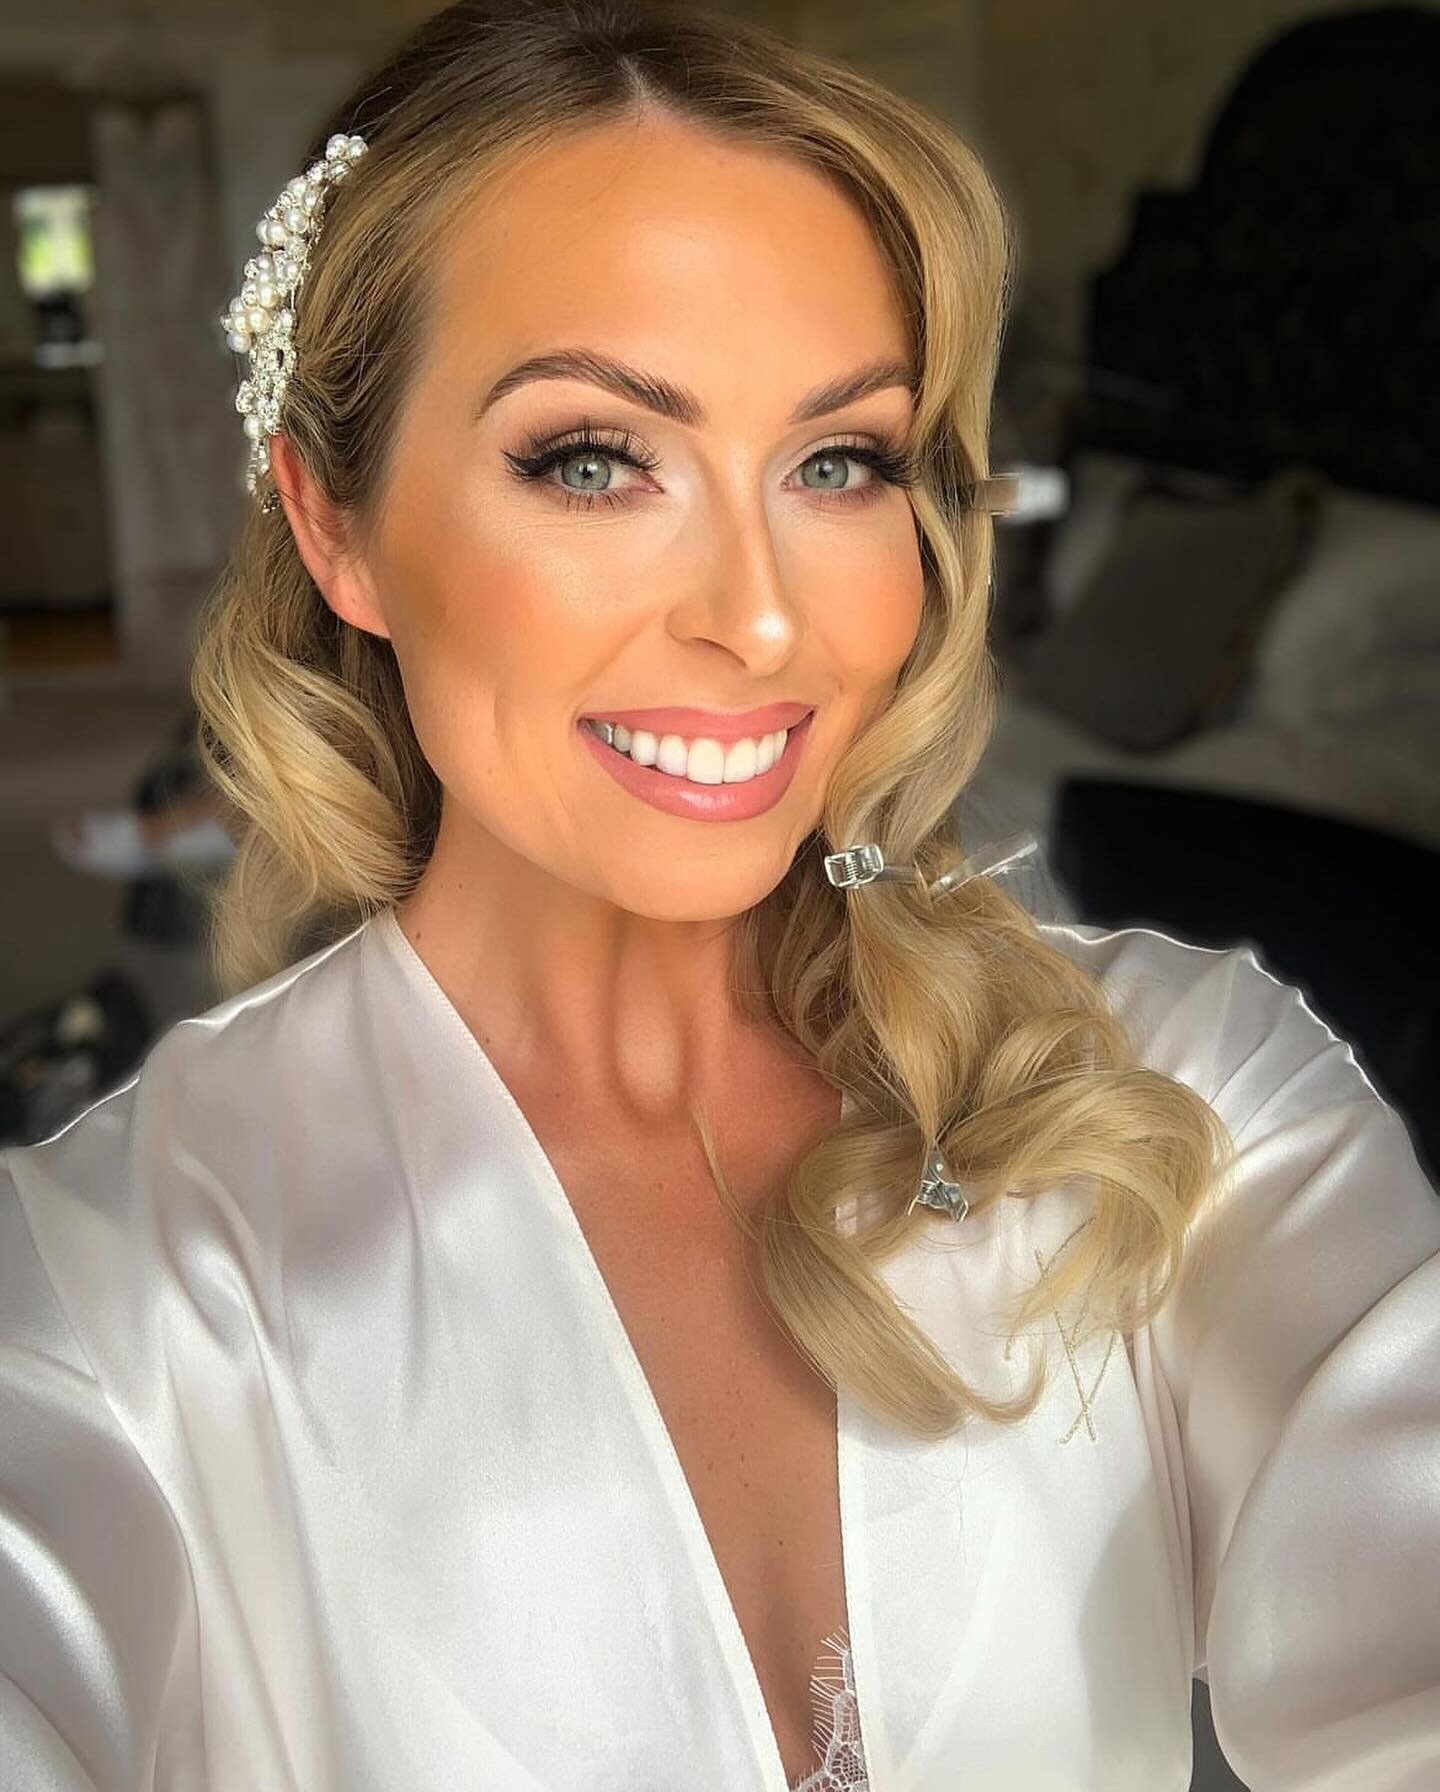 Capturing those getting ready moments. Makeup selfie from my beautiful bride @emilaaay_x and wedding day bliss with all the details from the day by @andersonphotofilm 🩶📸💍
If you&rsquo;d like to book me for your wedding makeup, check out the link i